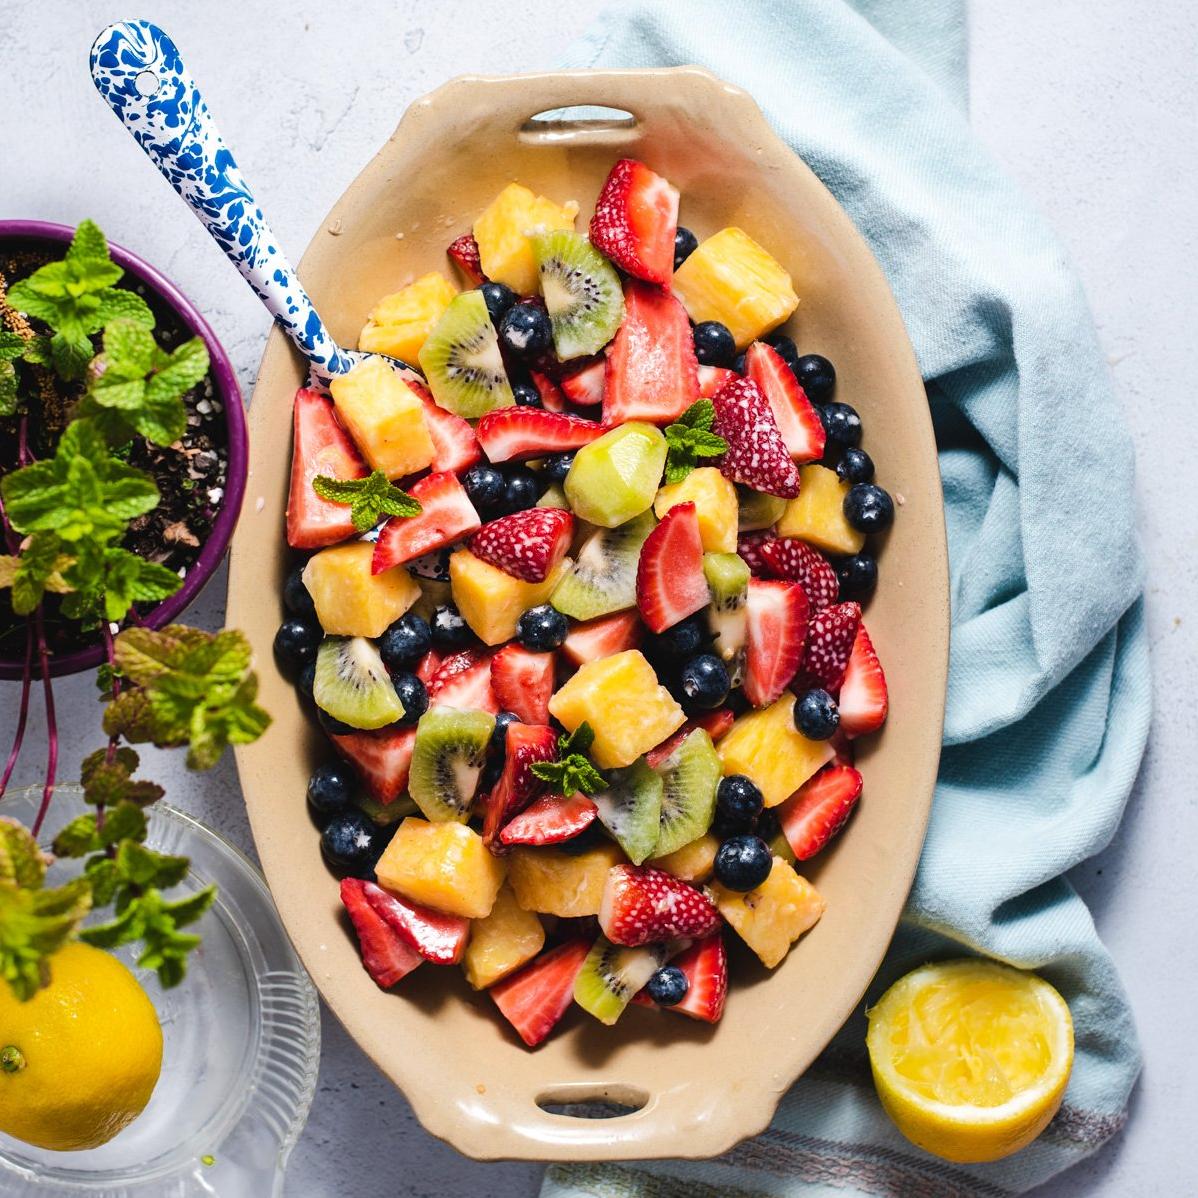  Whether you're a vegan or not, this flavorful fruit salad is sure to be a hit.